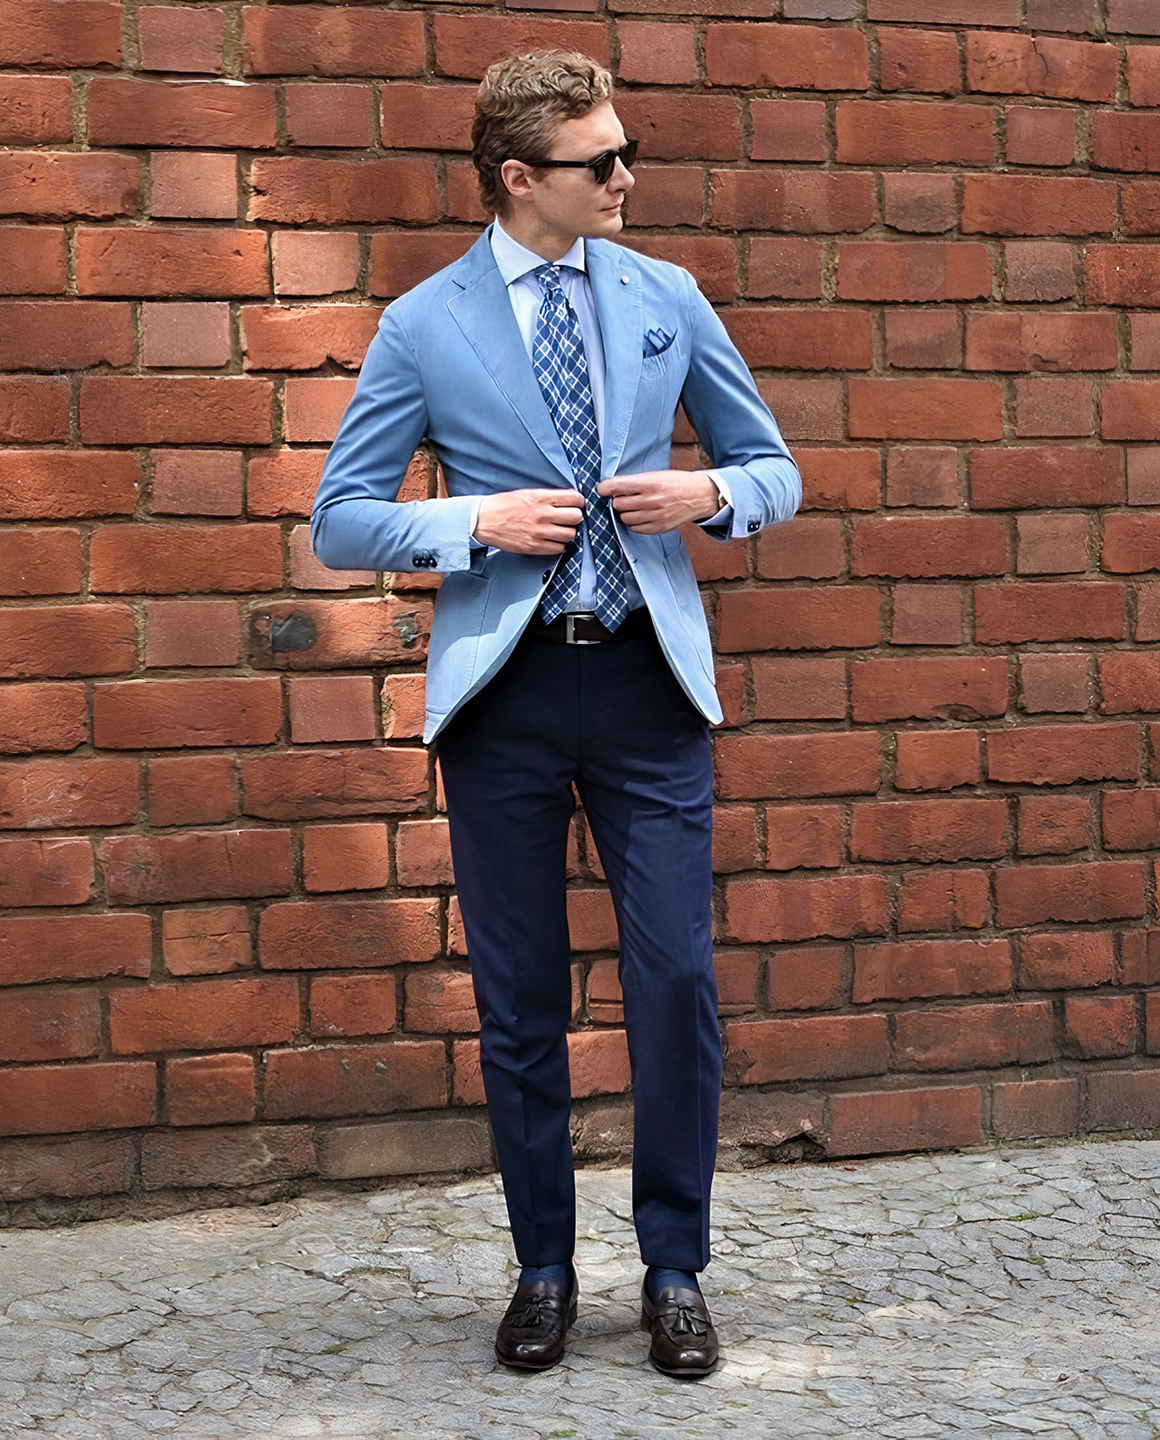 Blue blazer, light blue shirt, navy trousers, and brown loafers